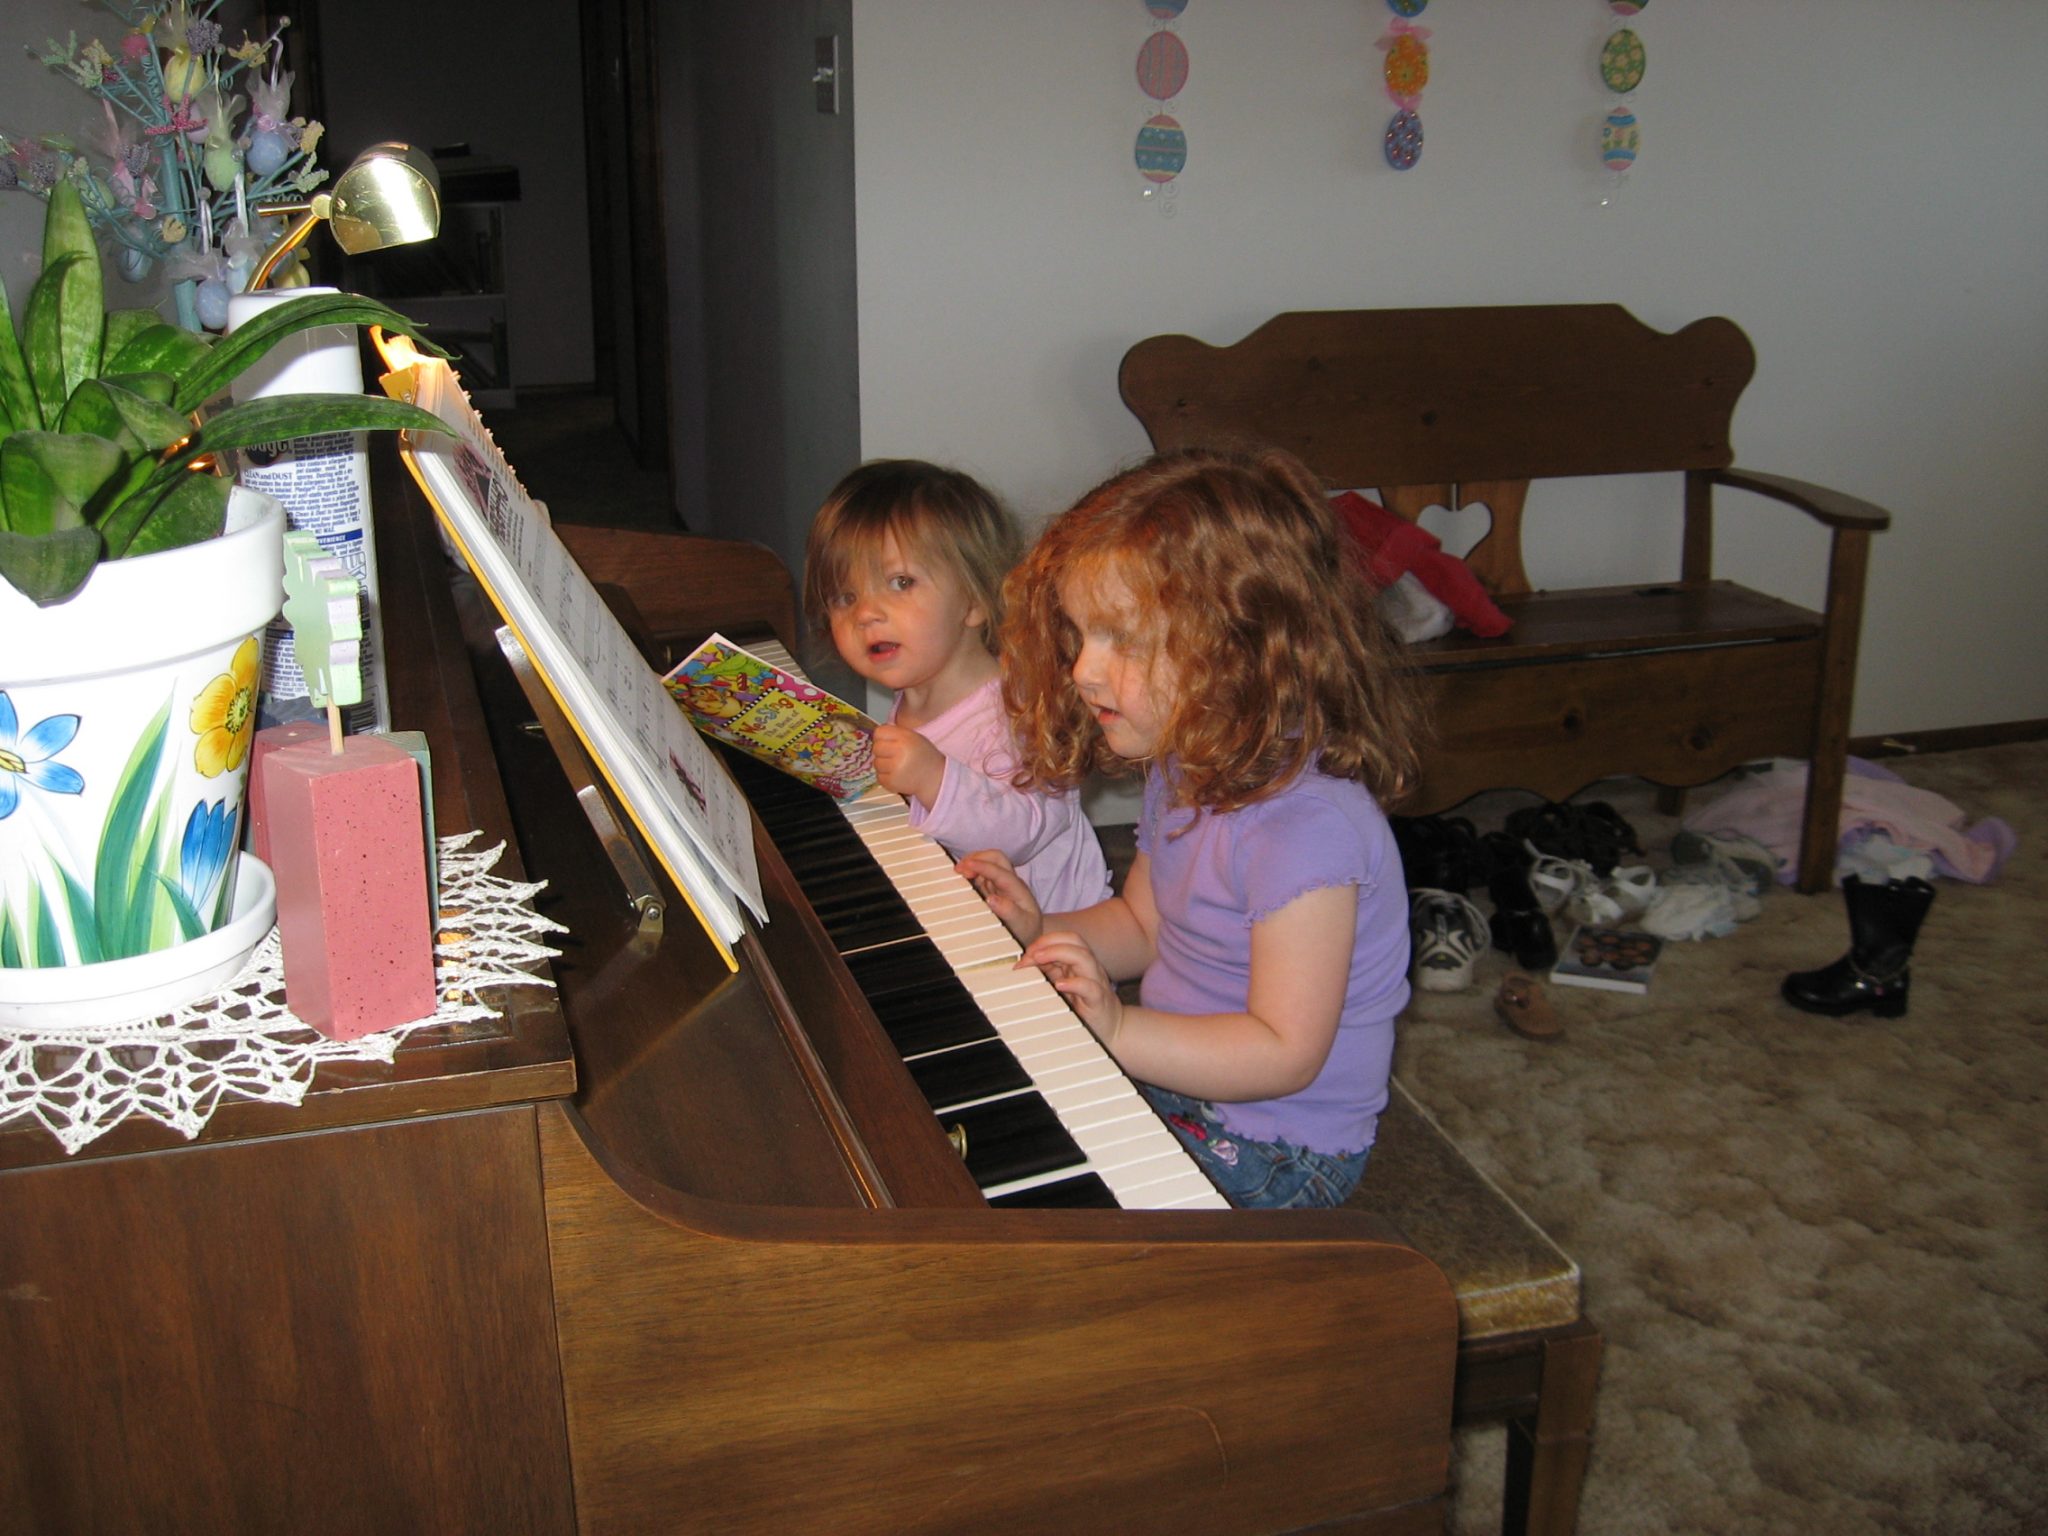 Img 9254 Rachel 14 And Allison 12 Singing And Playing In The Basement Of Their Bismarck Home Img 1294 Rachel 9 And Allison 6 At A Piano Recital Img 0781 Rachel 3 And Allison 16 Months Img 0630 Rachel 3 And Allison 16 Months Bleth Girls